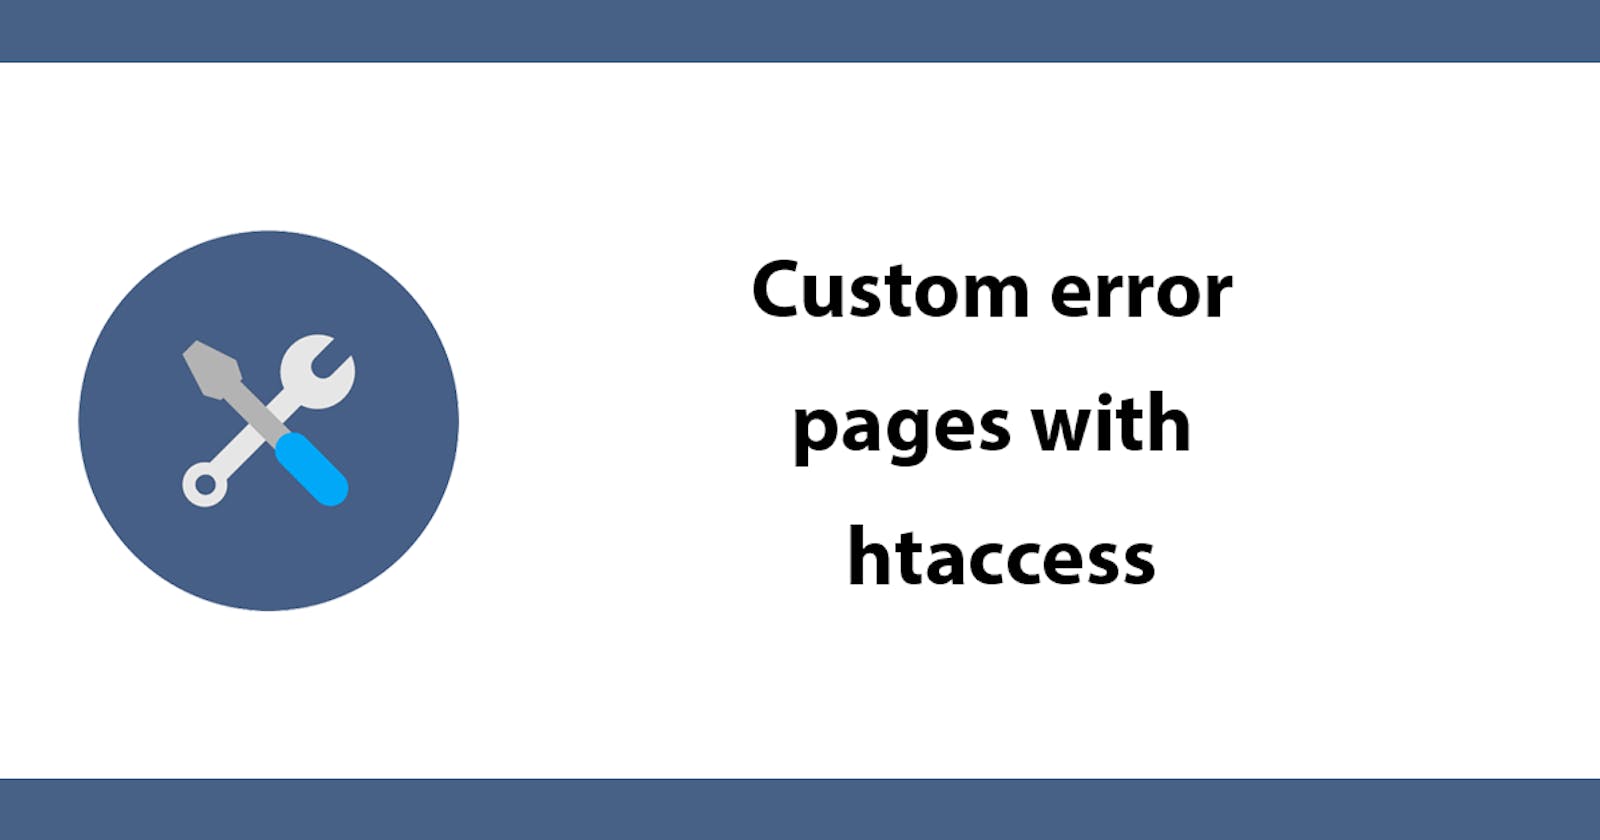 Custom error pages with htaccess